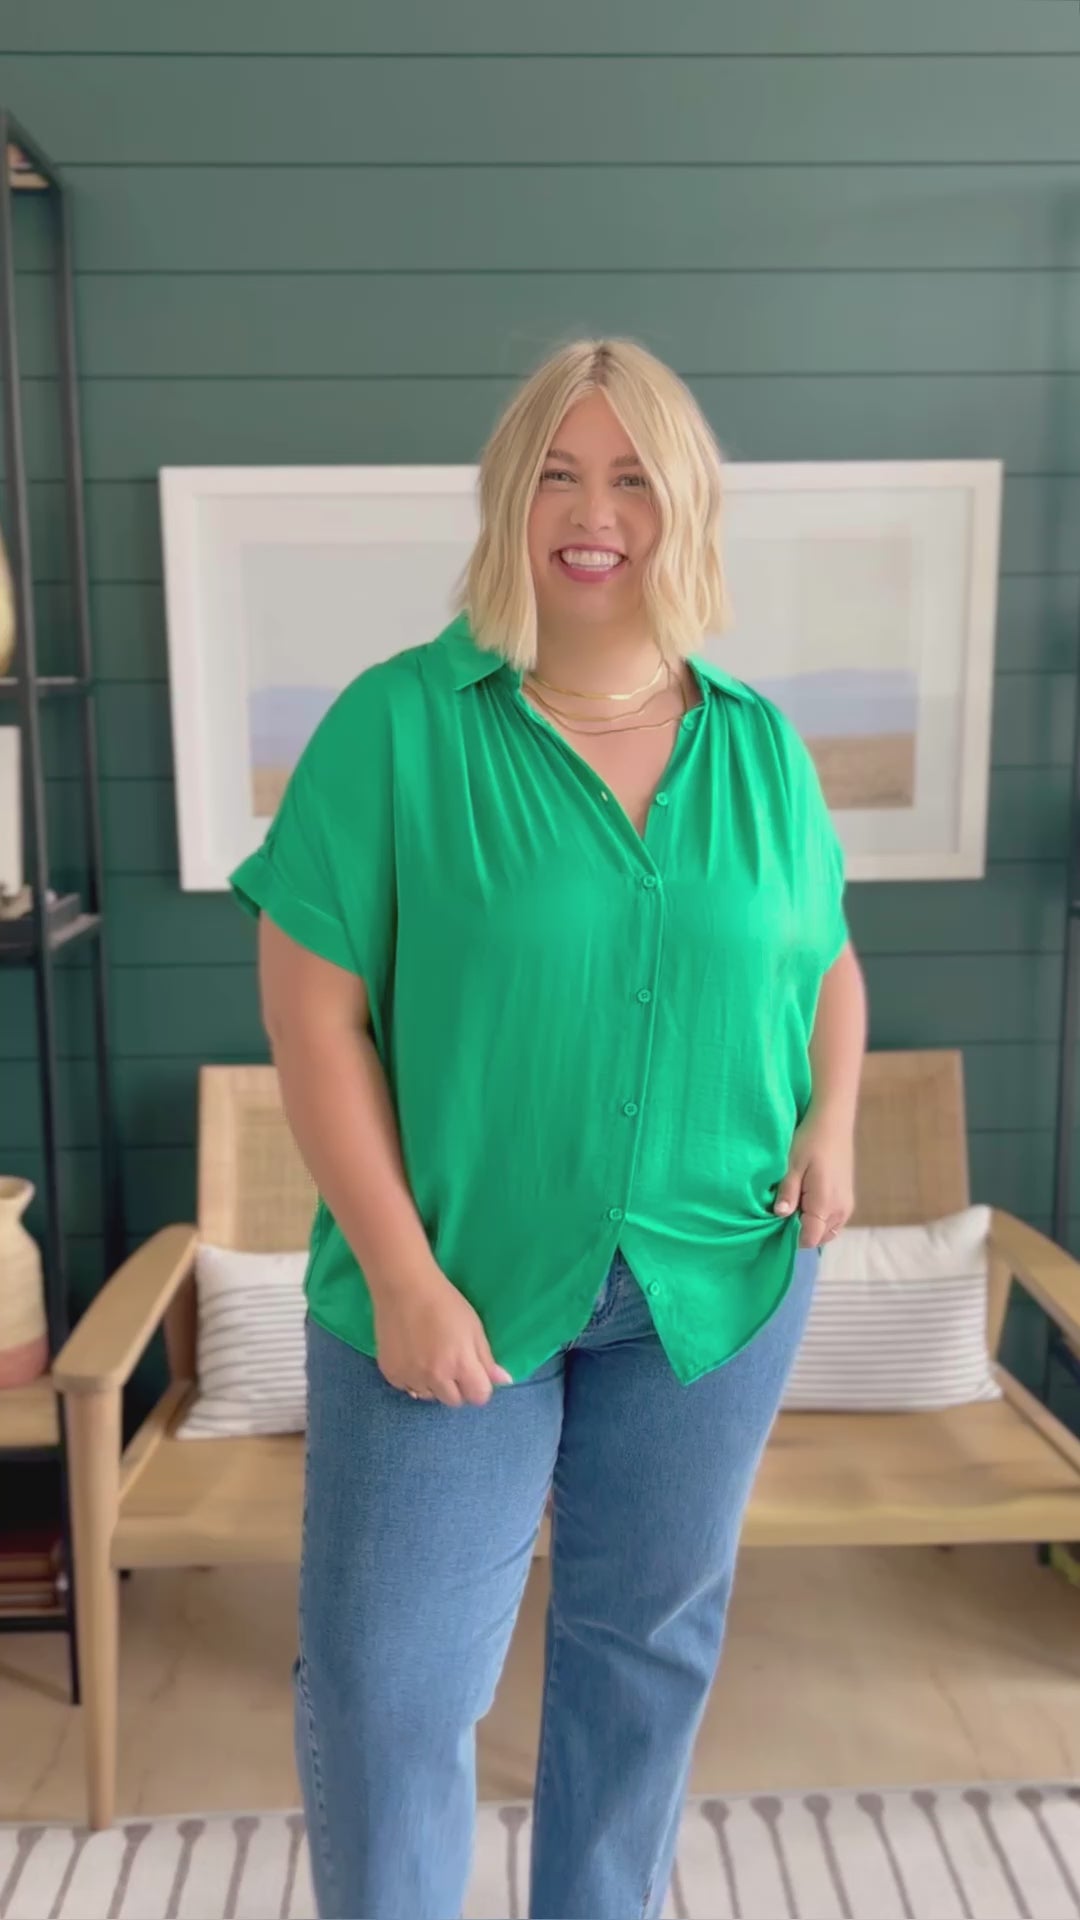 Working On Me Top in Kelly Green (Ships in 1-2 Weeks)